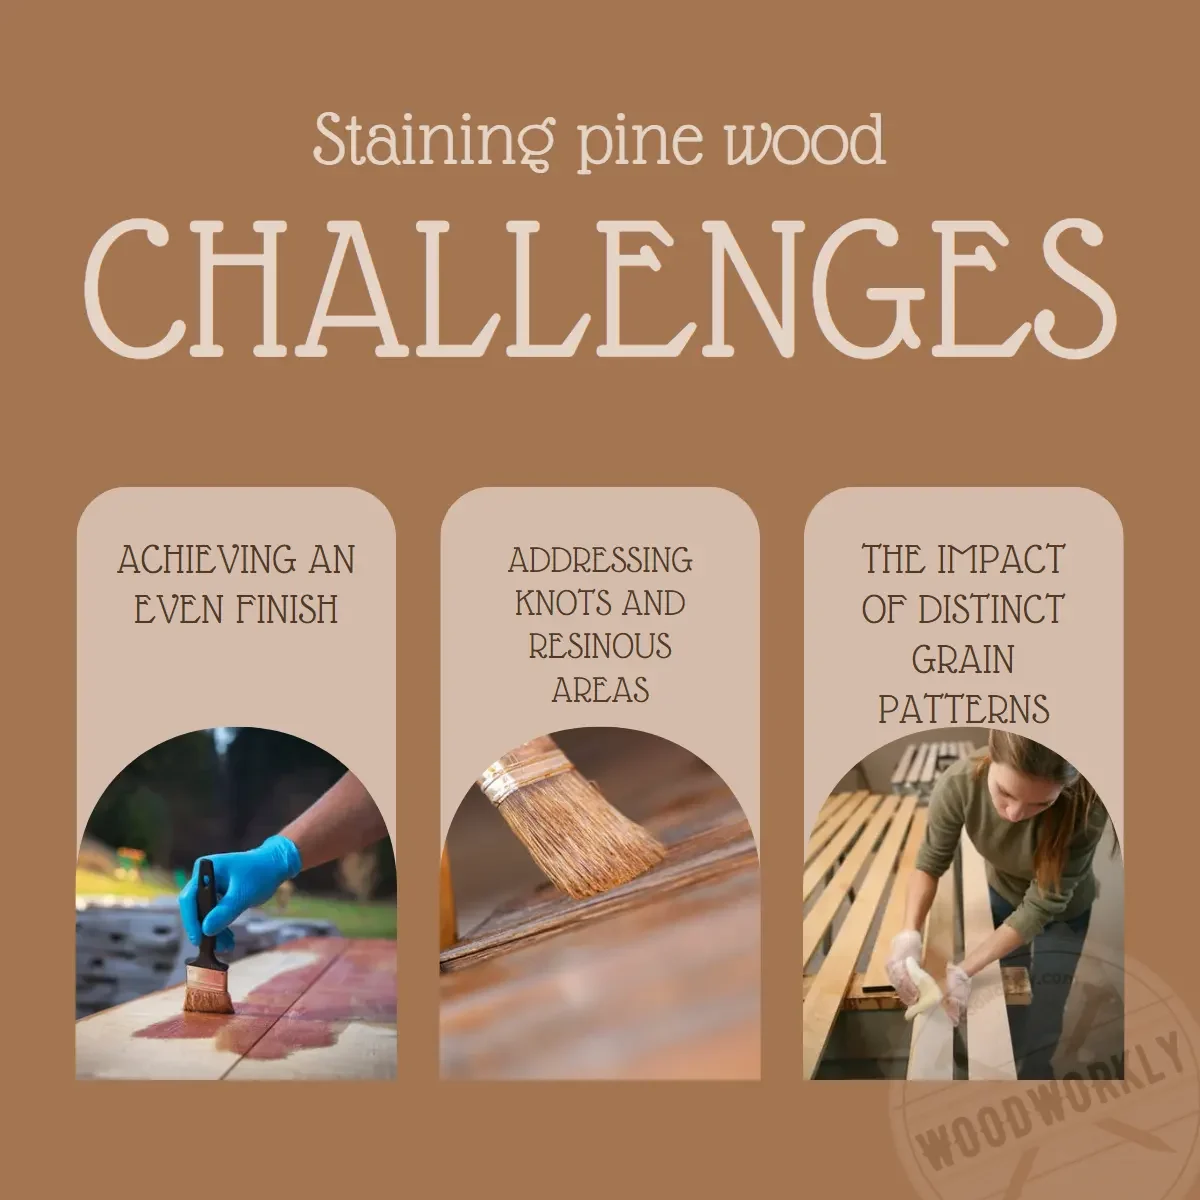 challengers of staining pine wood